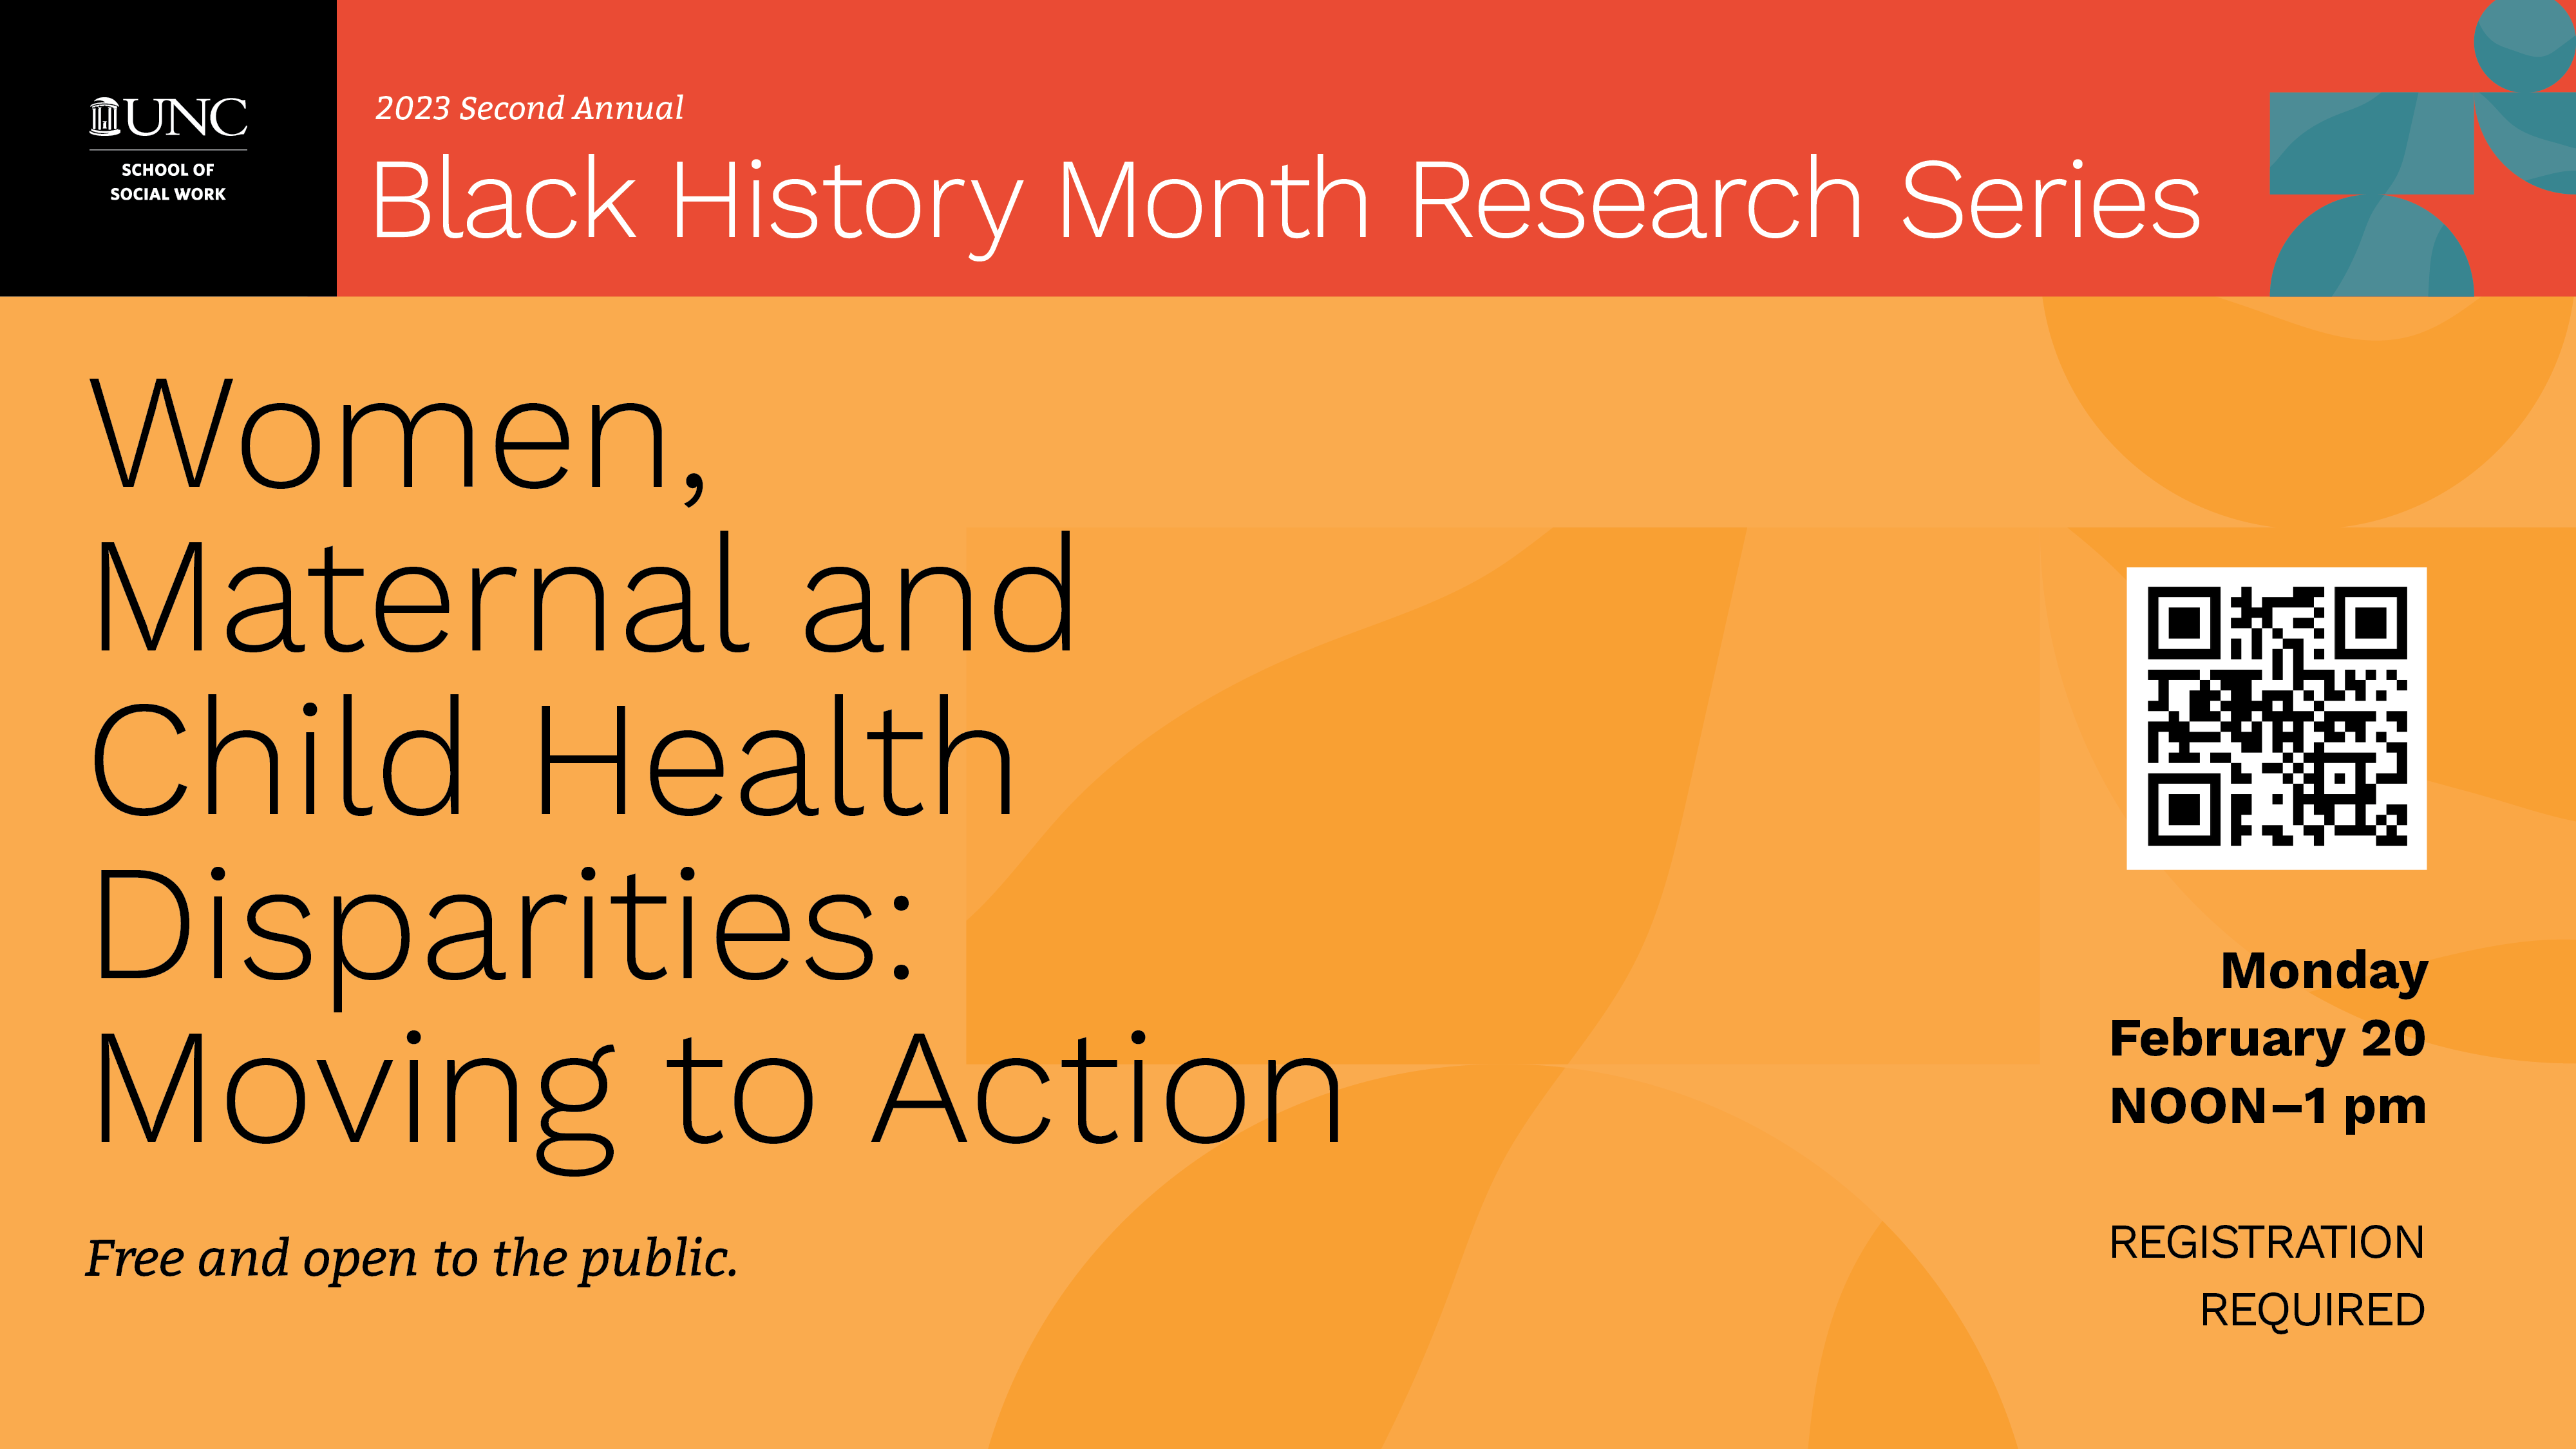 Women, Maternal and Child Health Disparities: Moving to Action